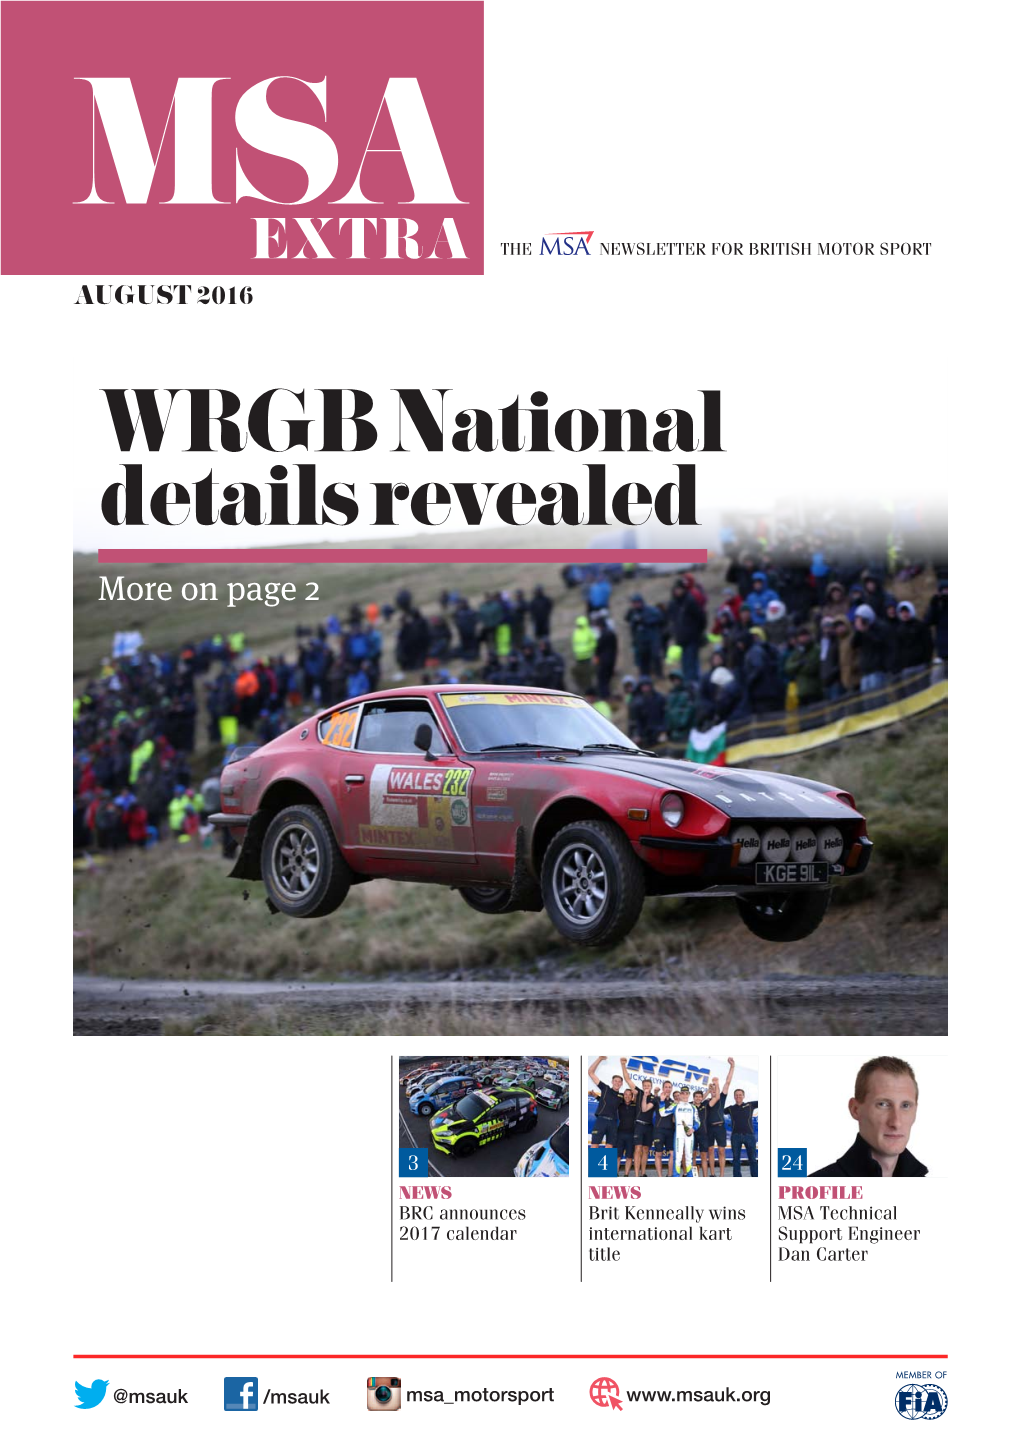 WRGB National Details Revealed More on Page 2